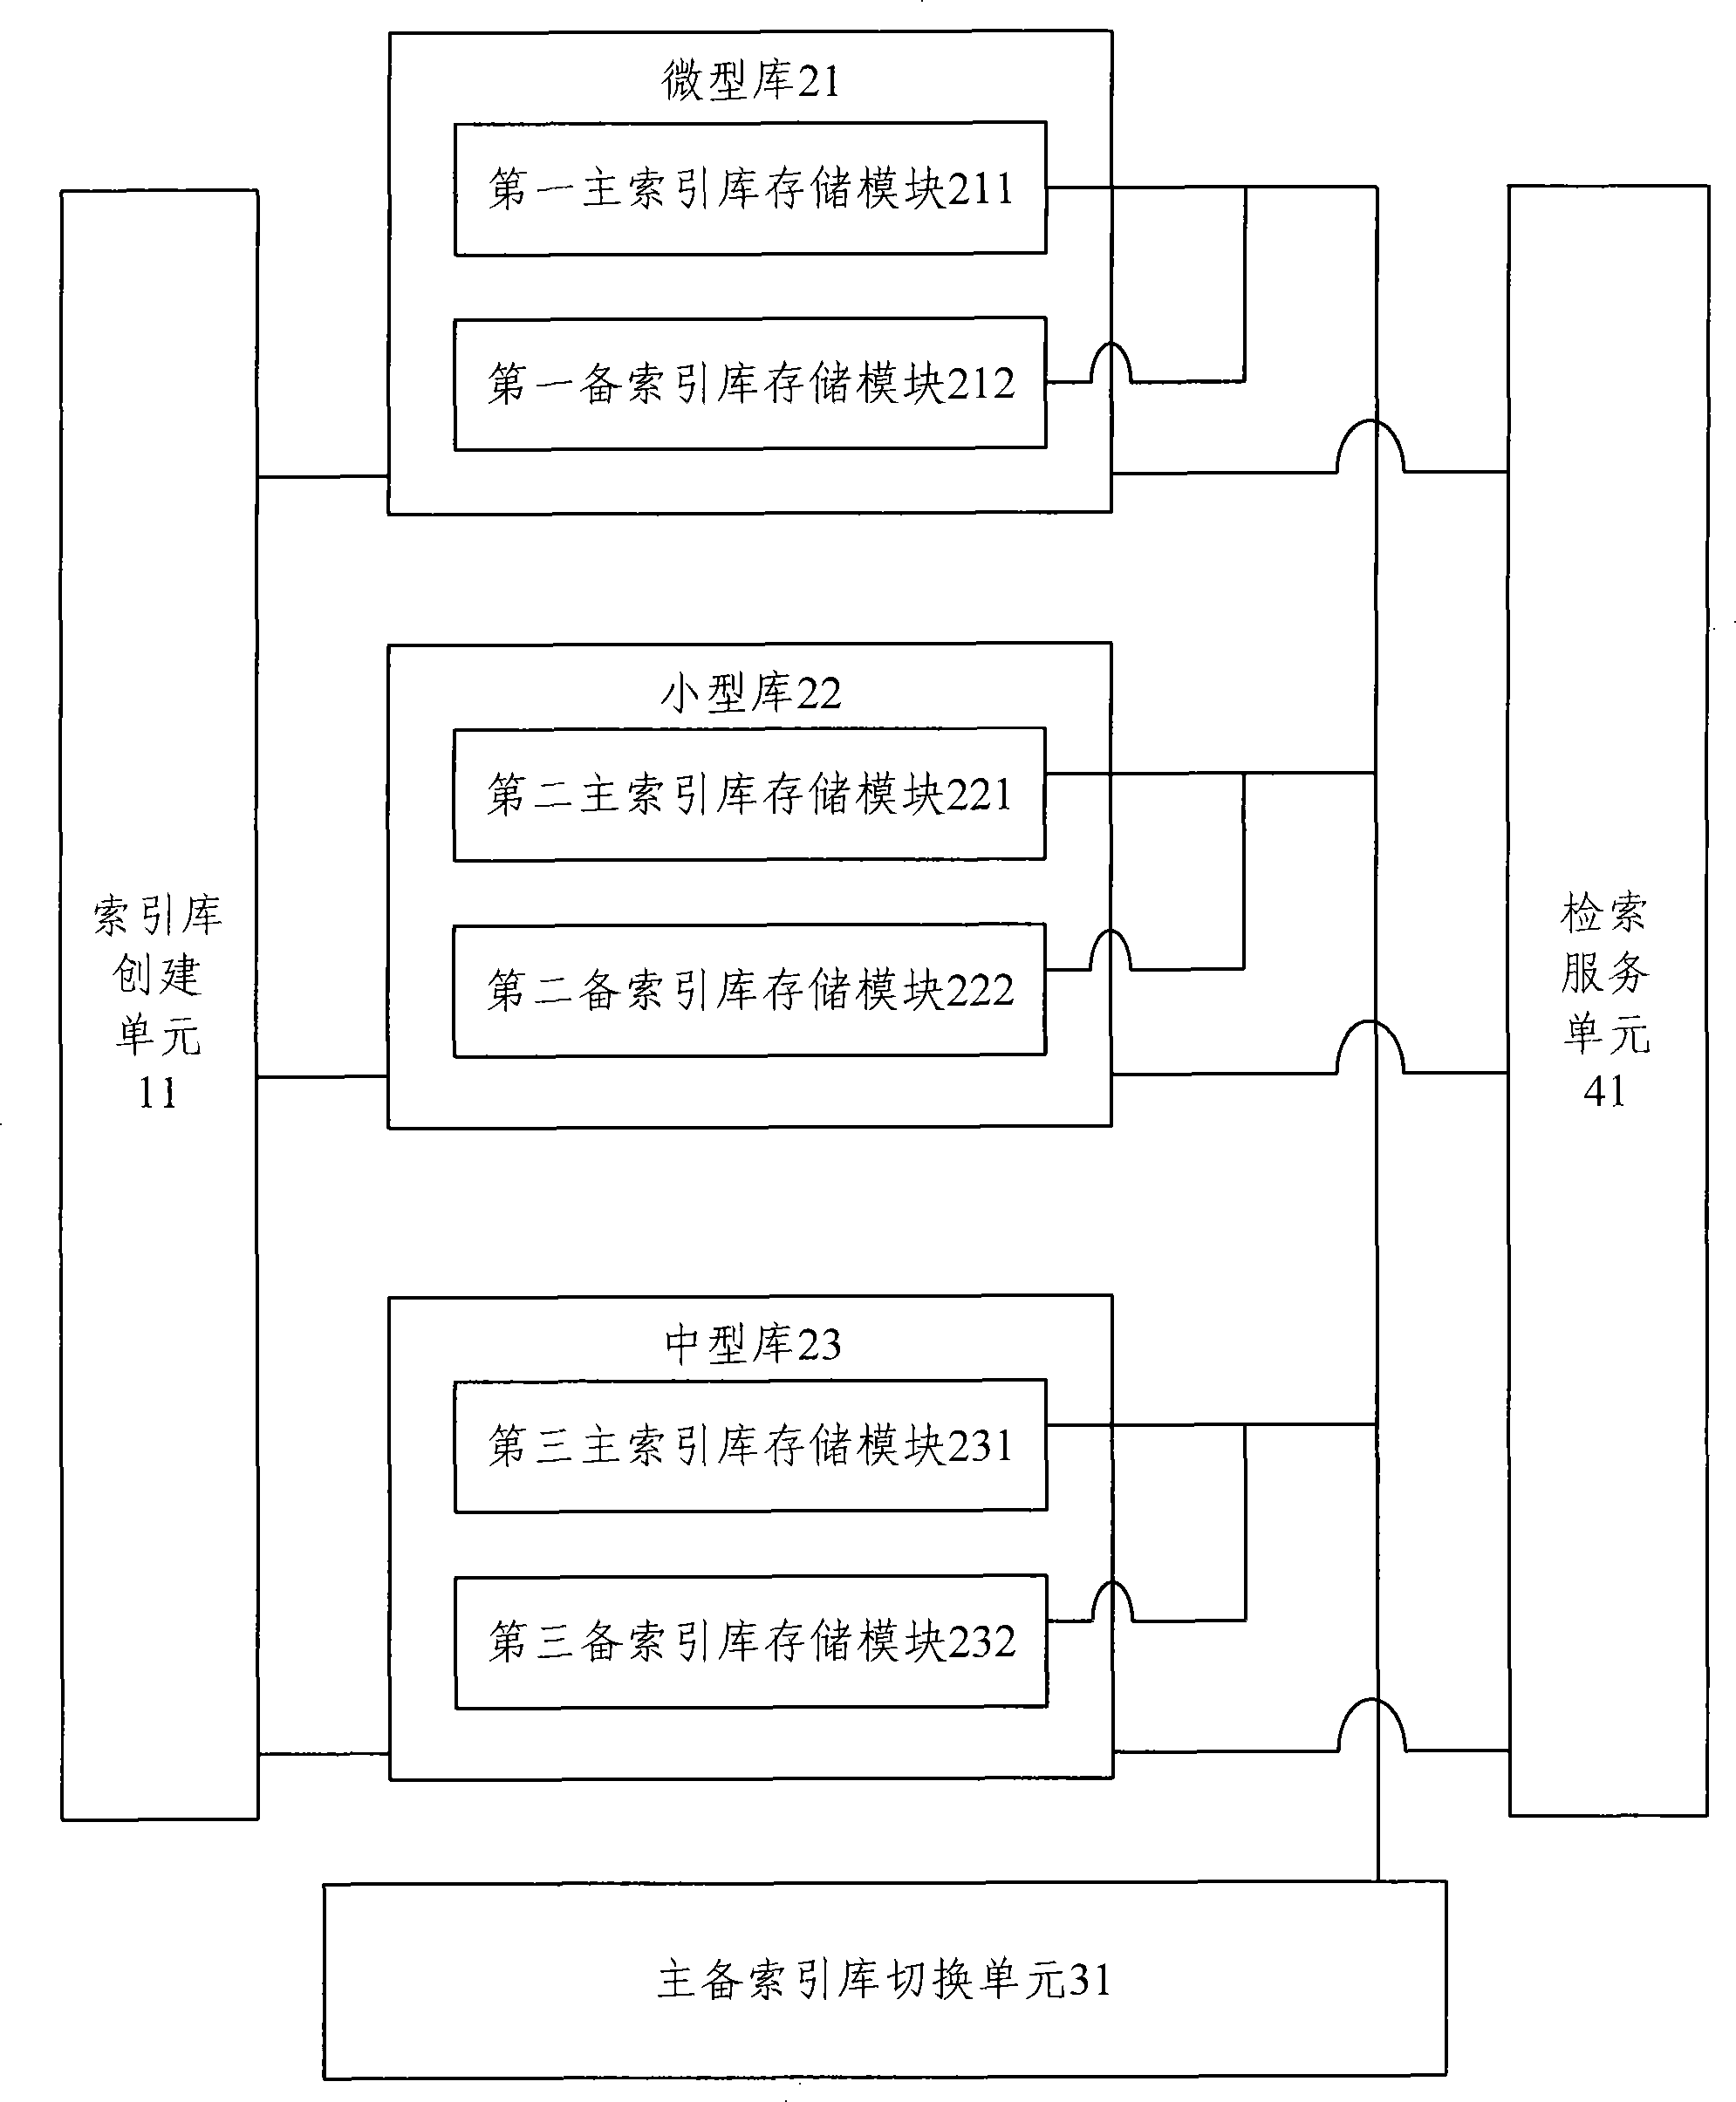 Retrieval system and method for implementing data fast indexing